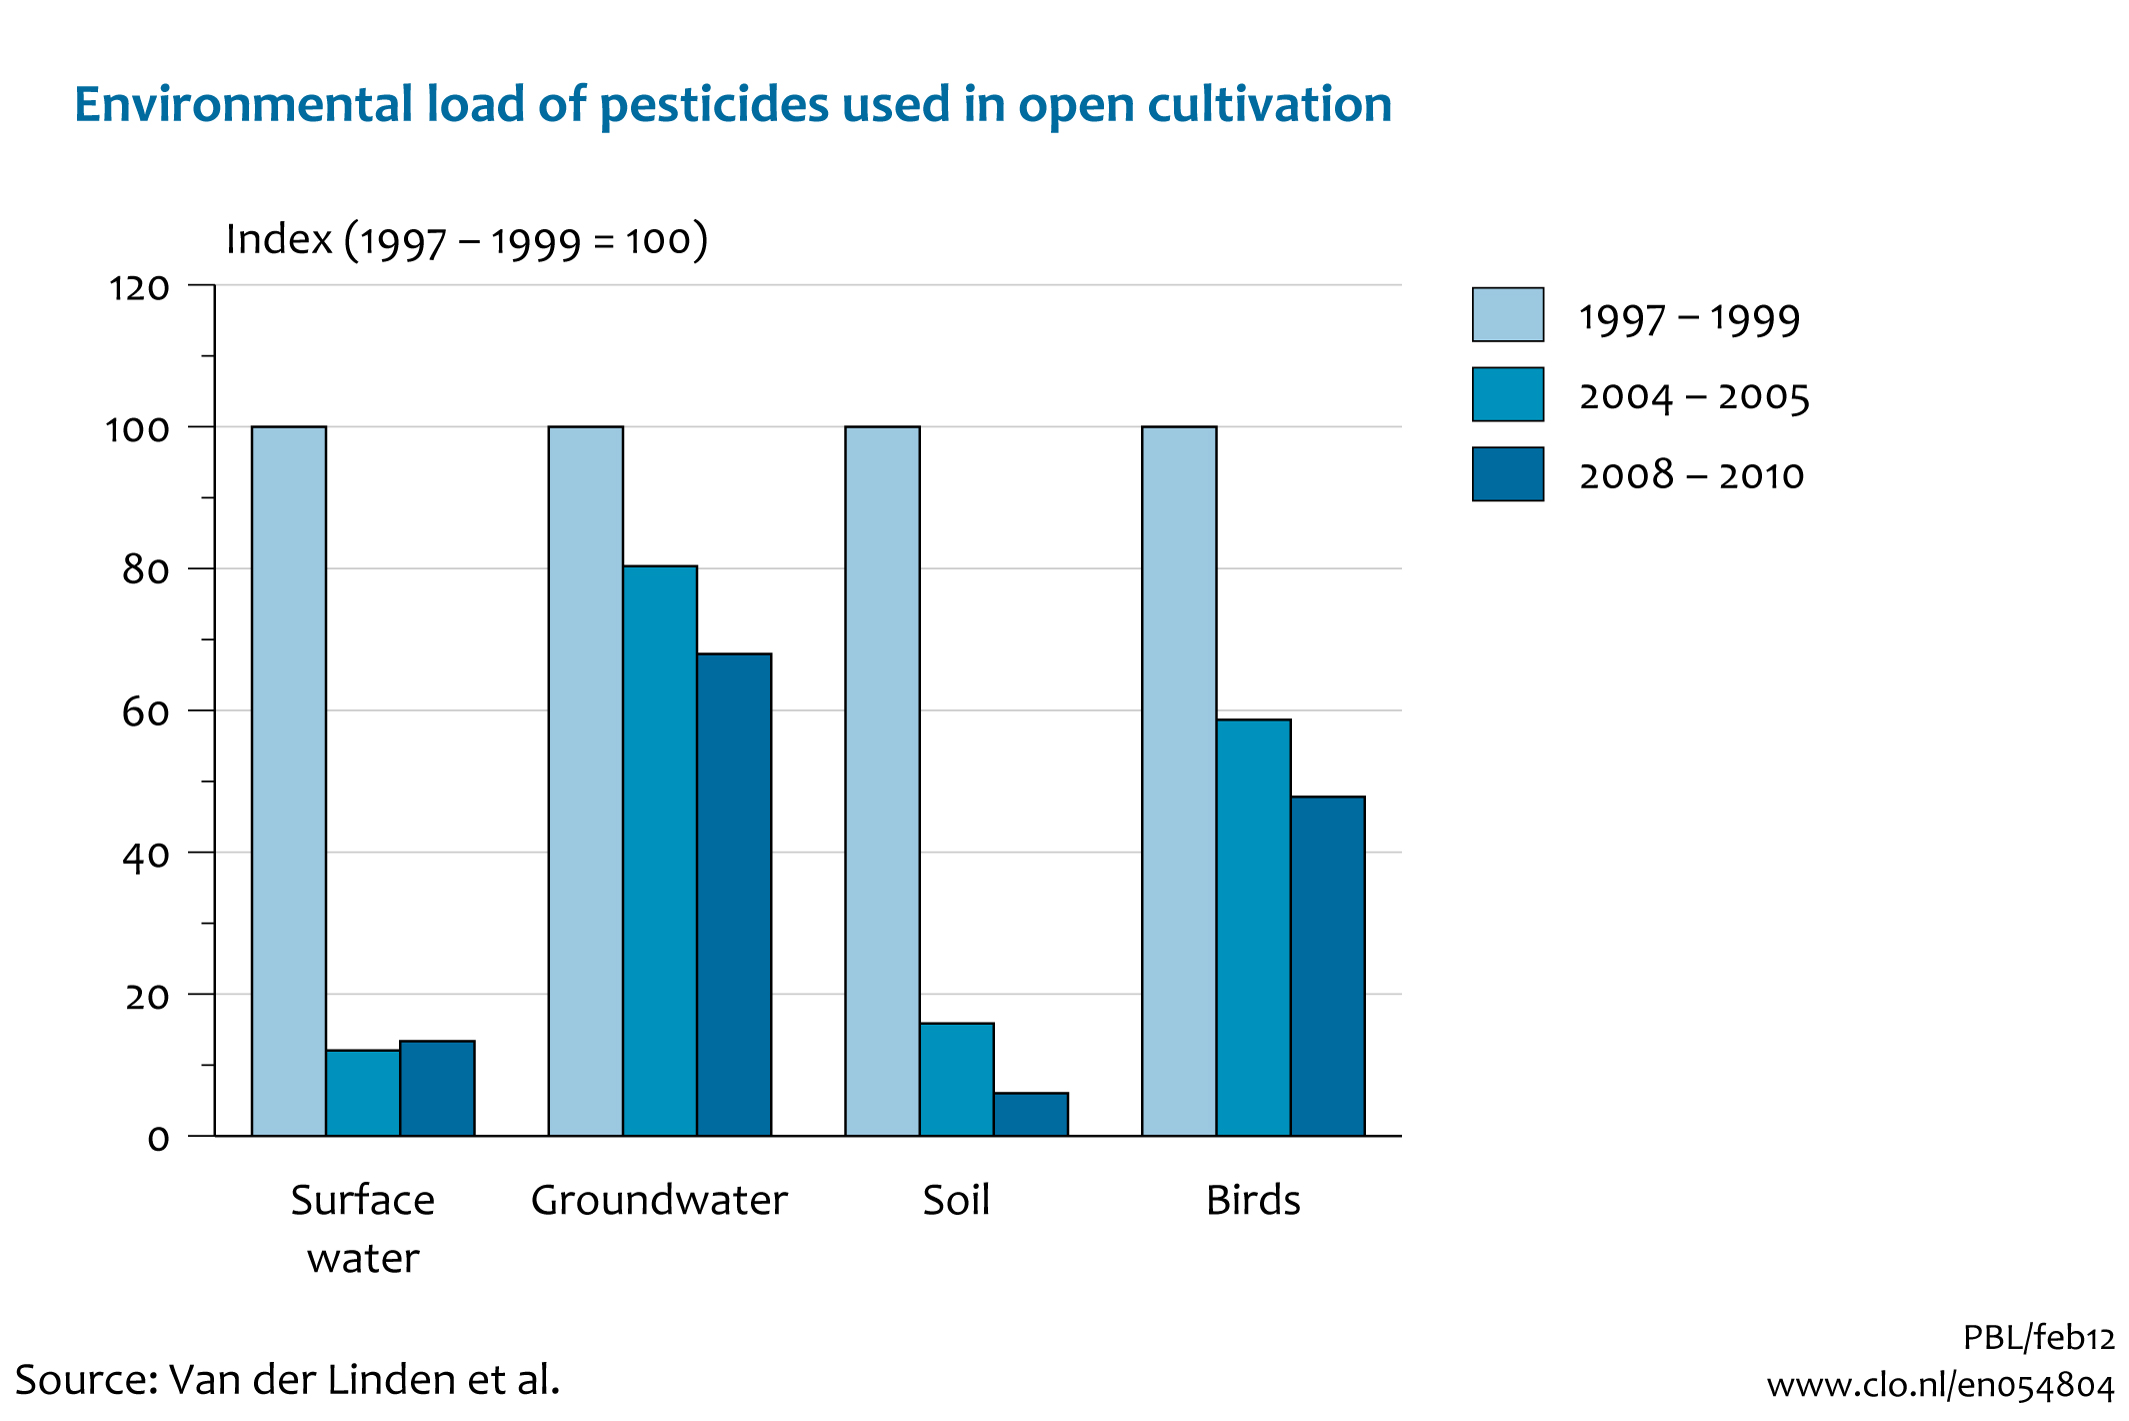 Image Environmental load of pesticides in open cultivation. The image is further explained in the text.